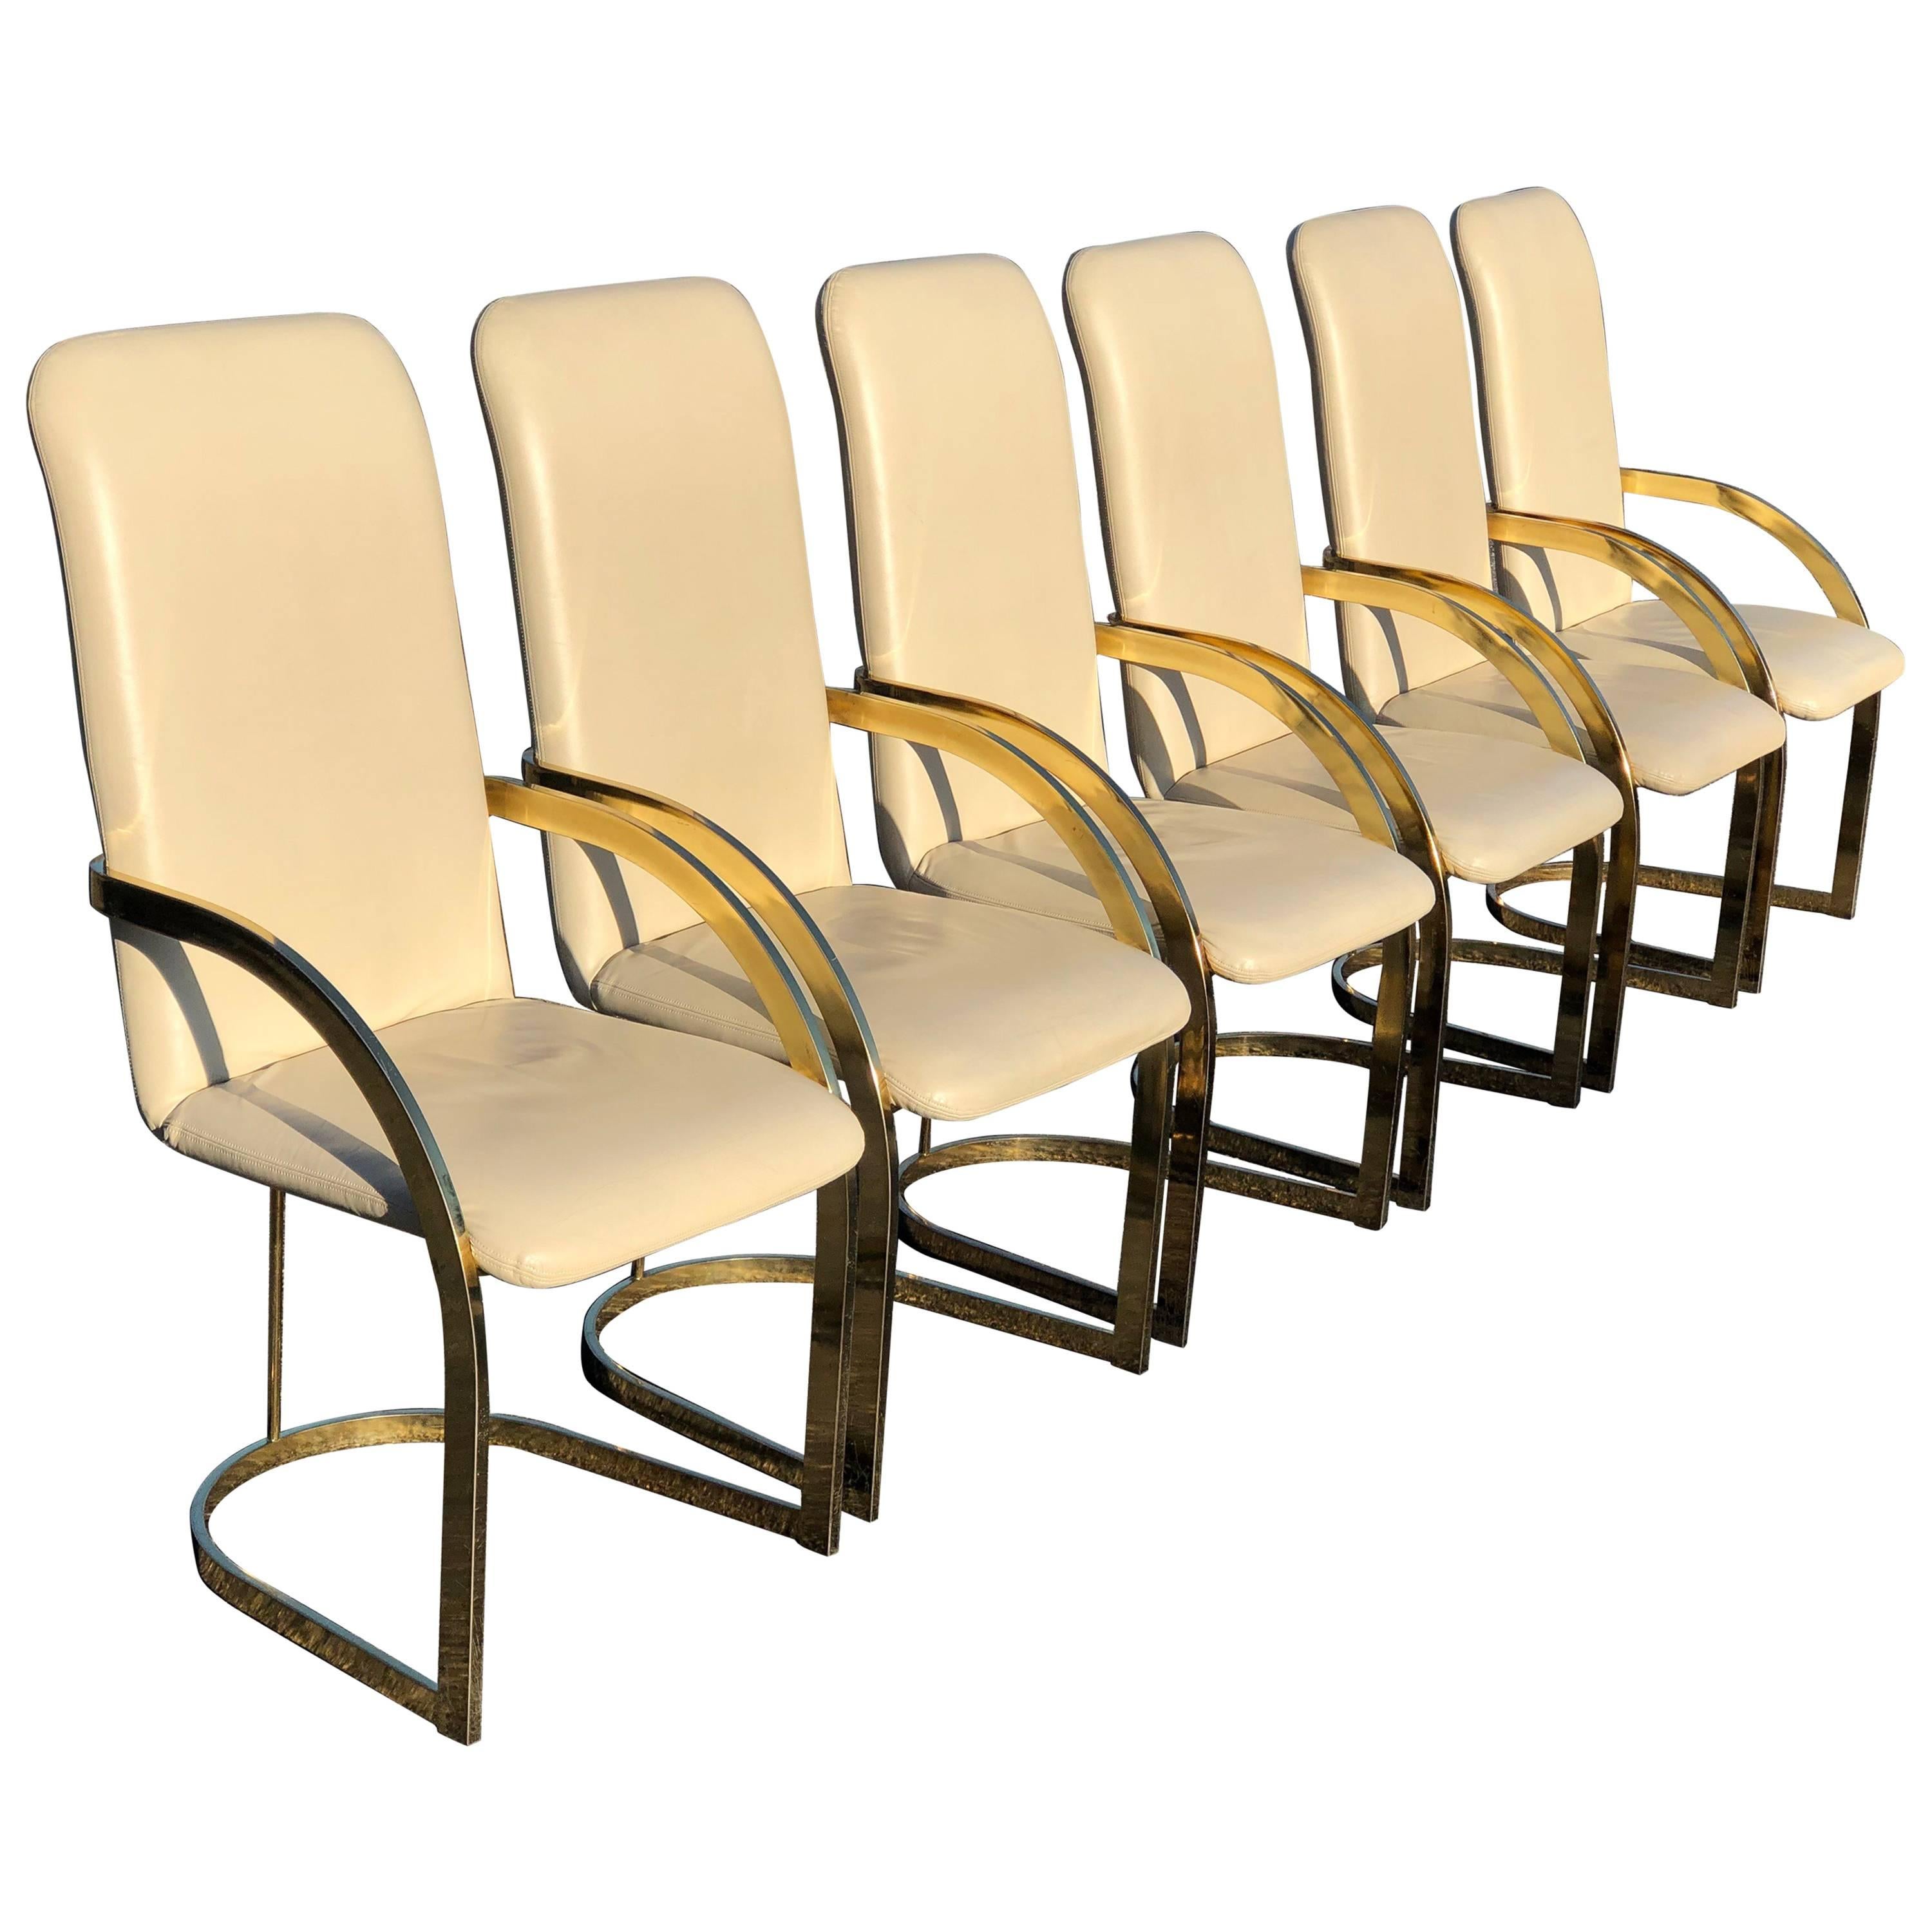 Milo Baughman Style Brass and Leather, Set of Chairs